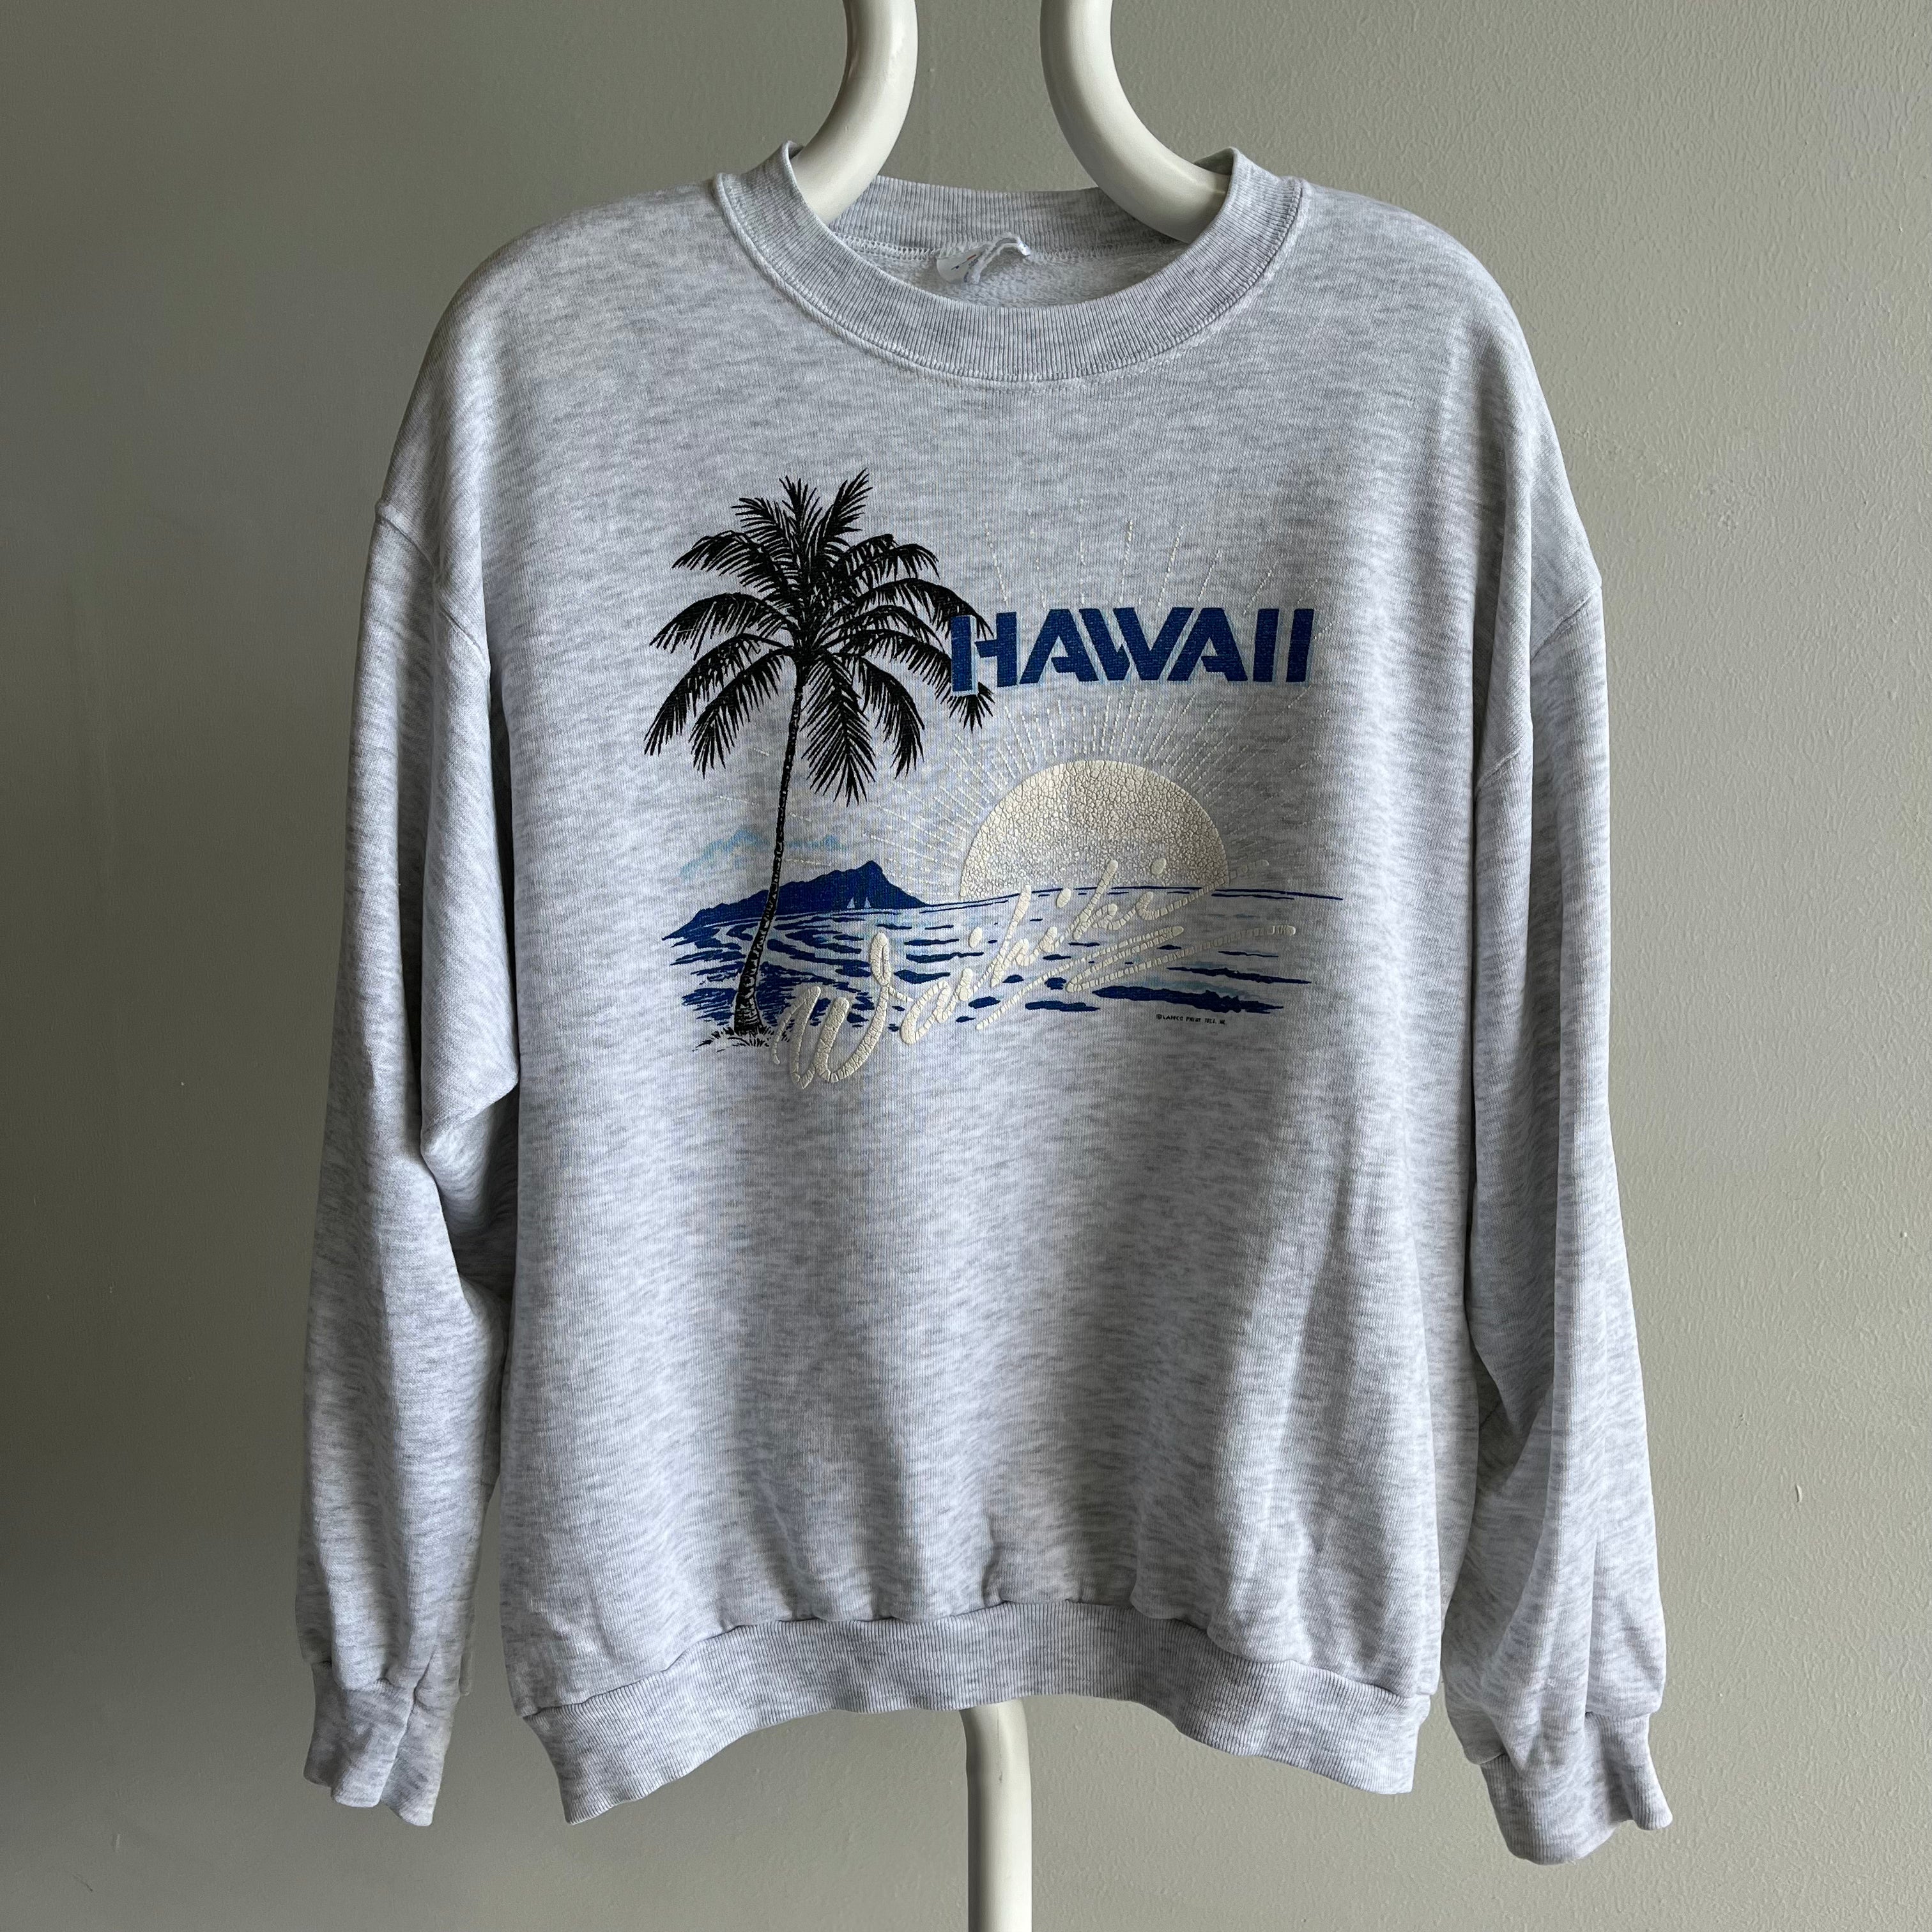 1990s SUPER THINNED OUT AND SLOUCHY Hawaii Sweatshirt